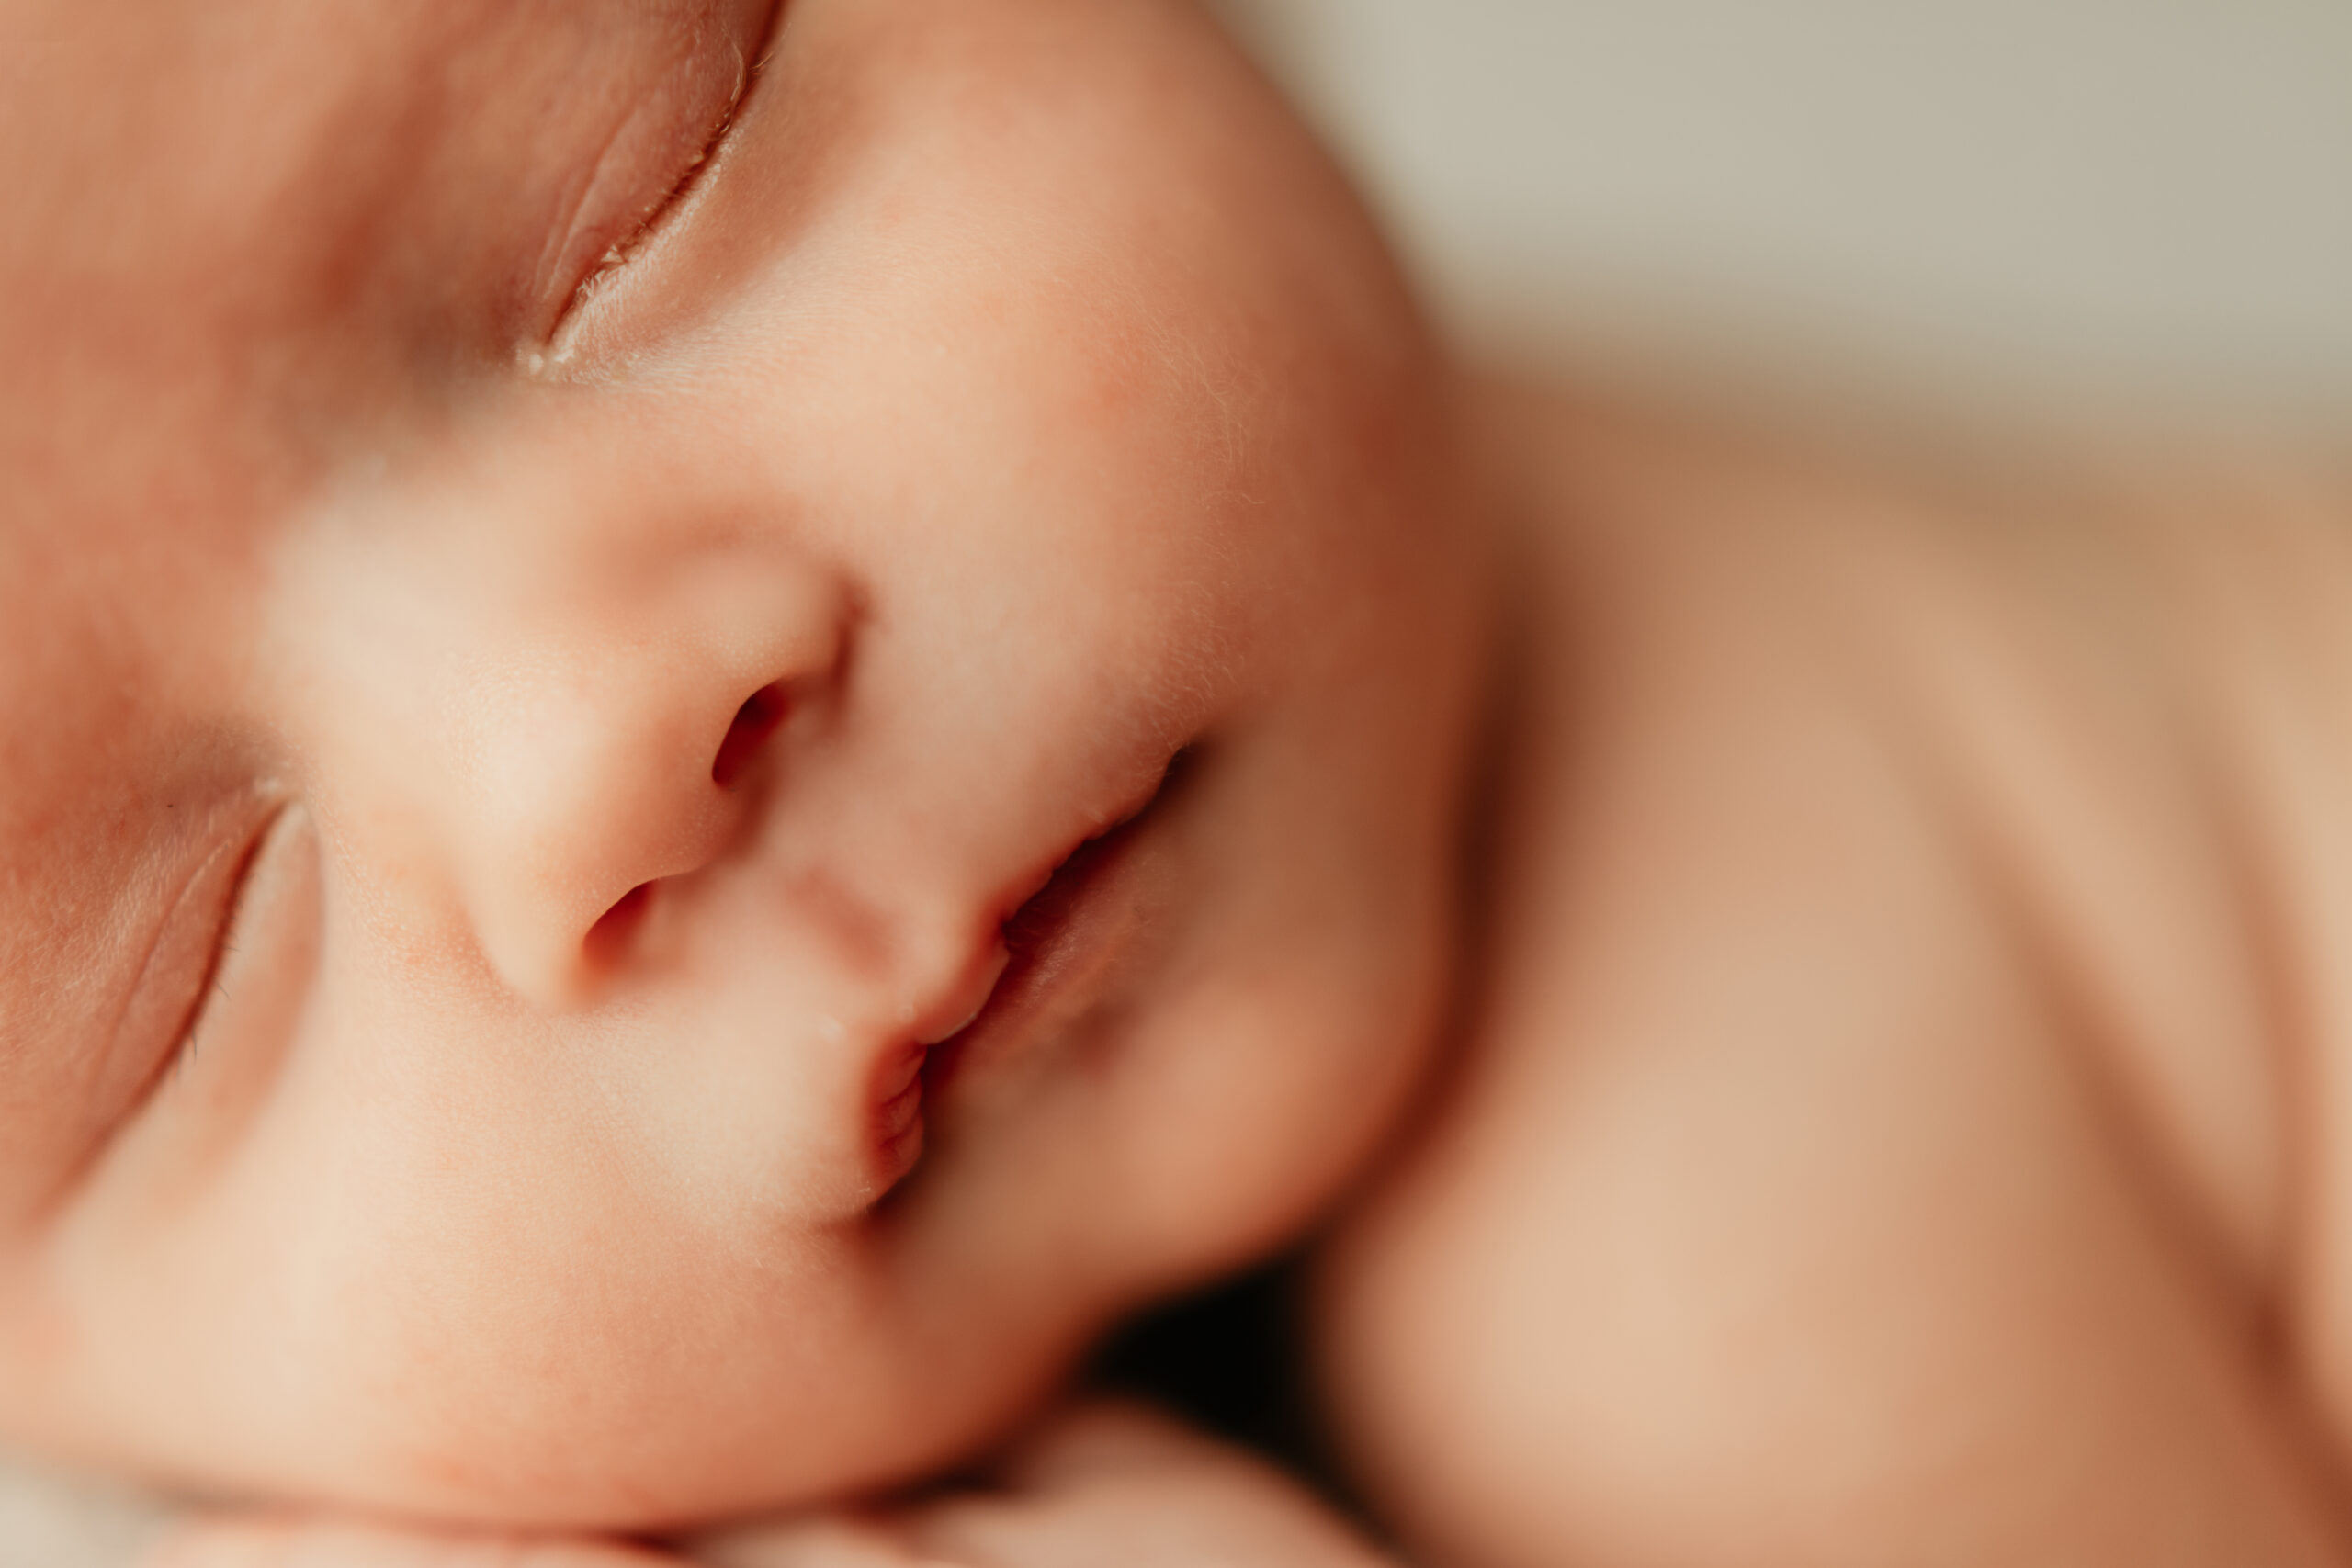 details of a newborn baby's lips and face Nashville lactation consultant